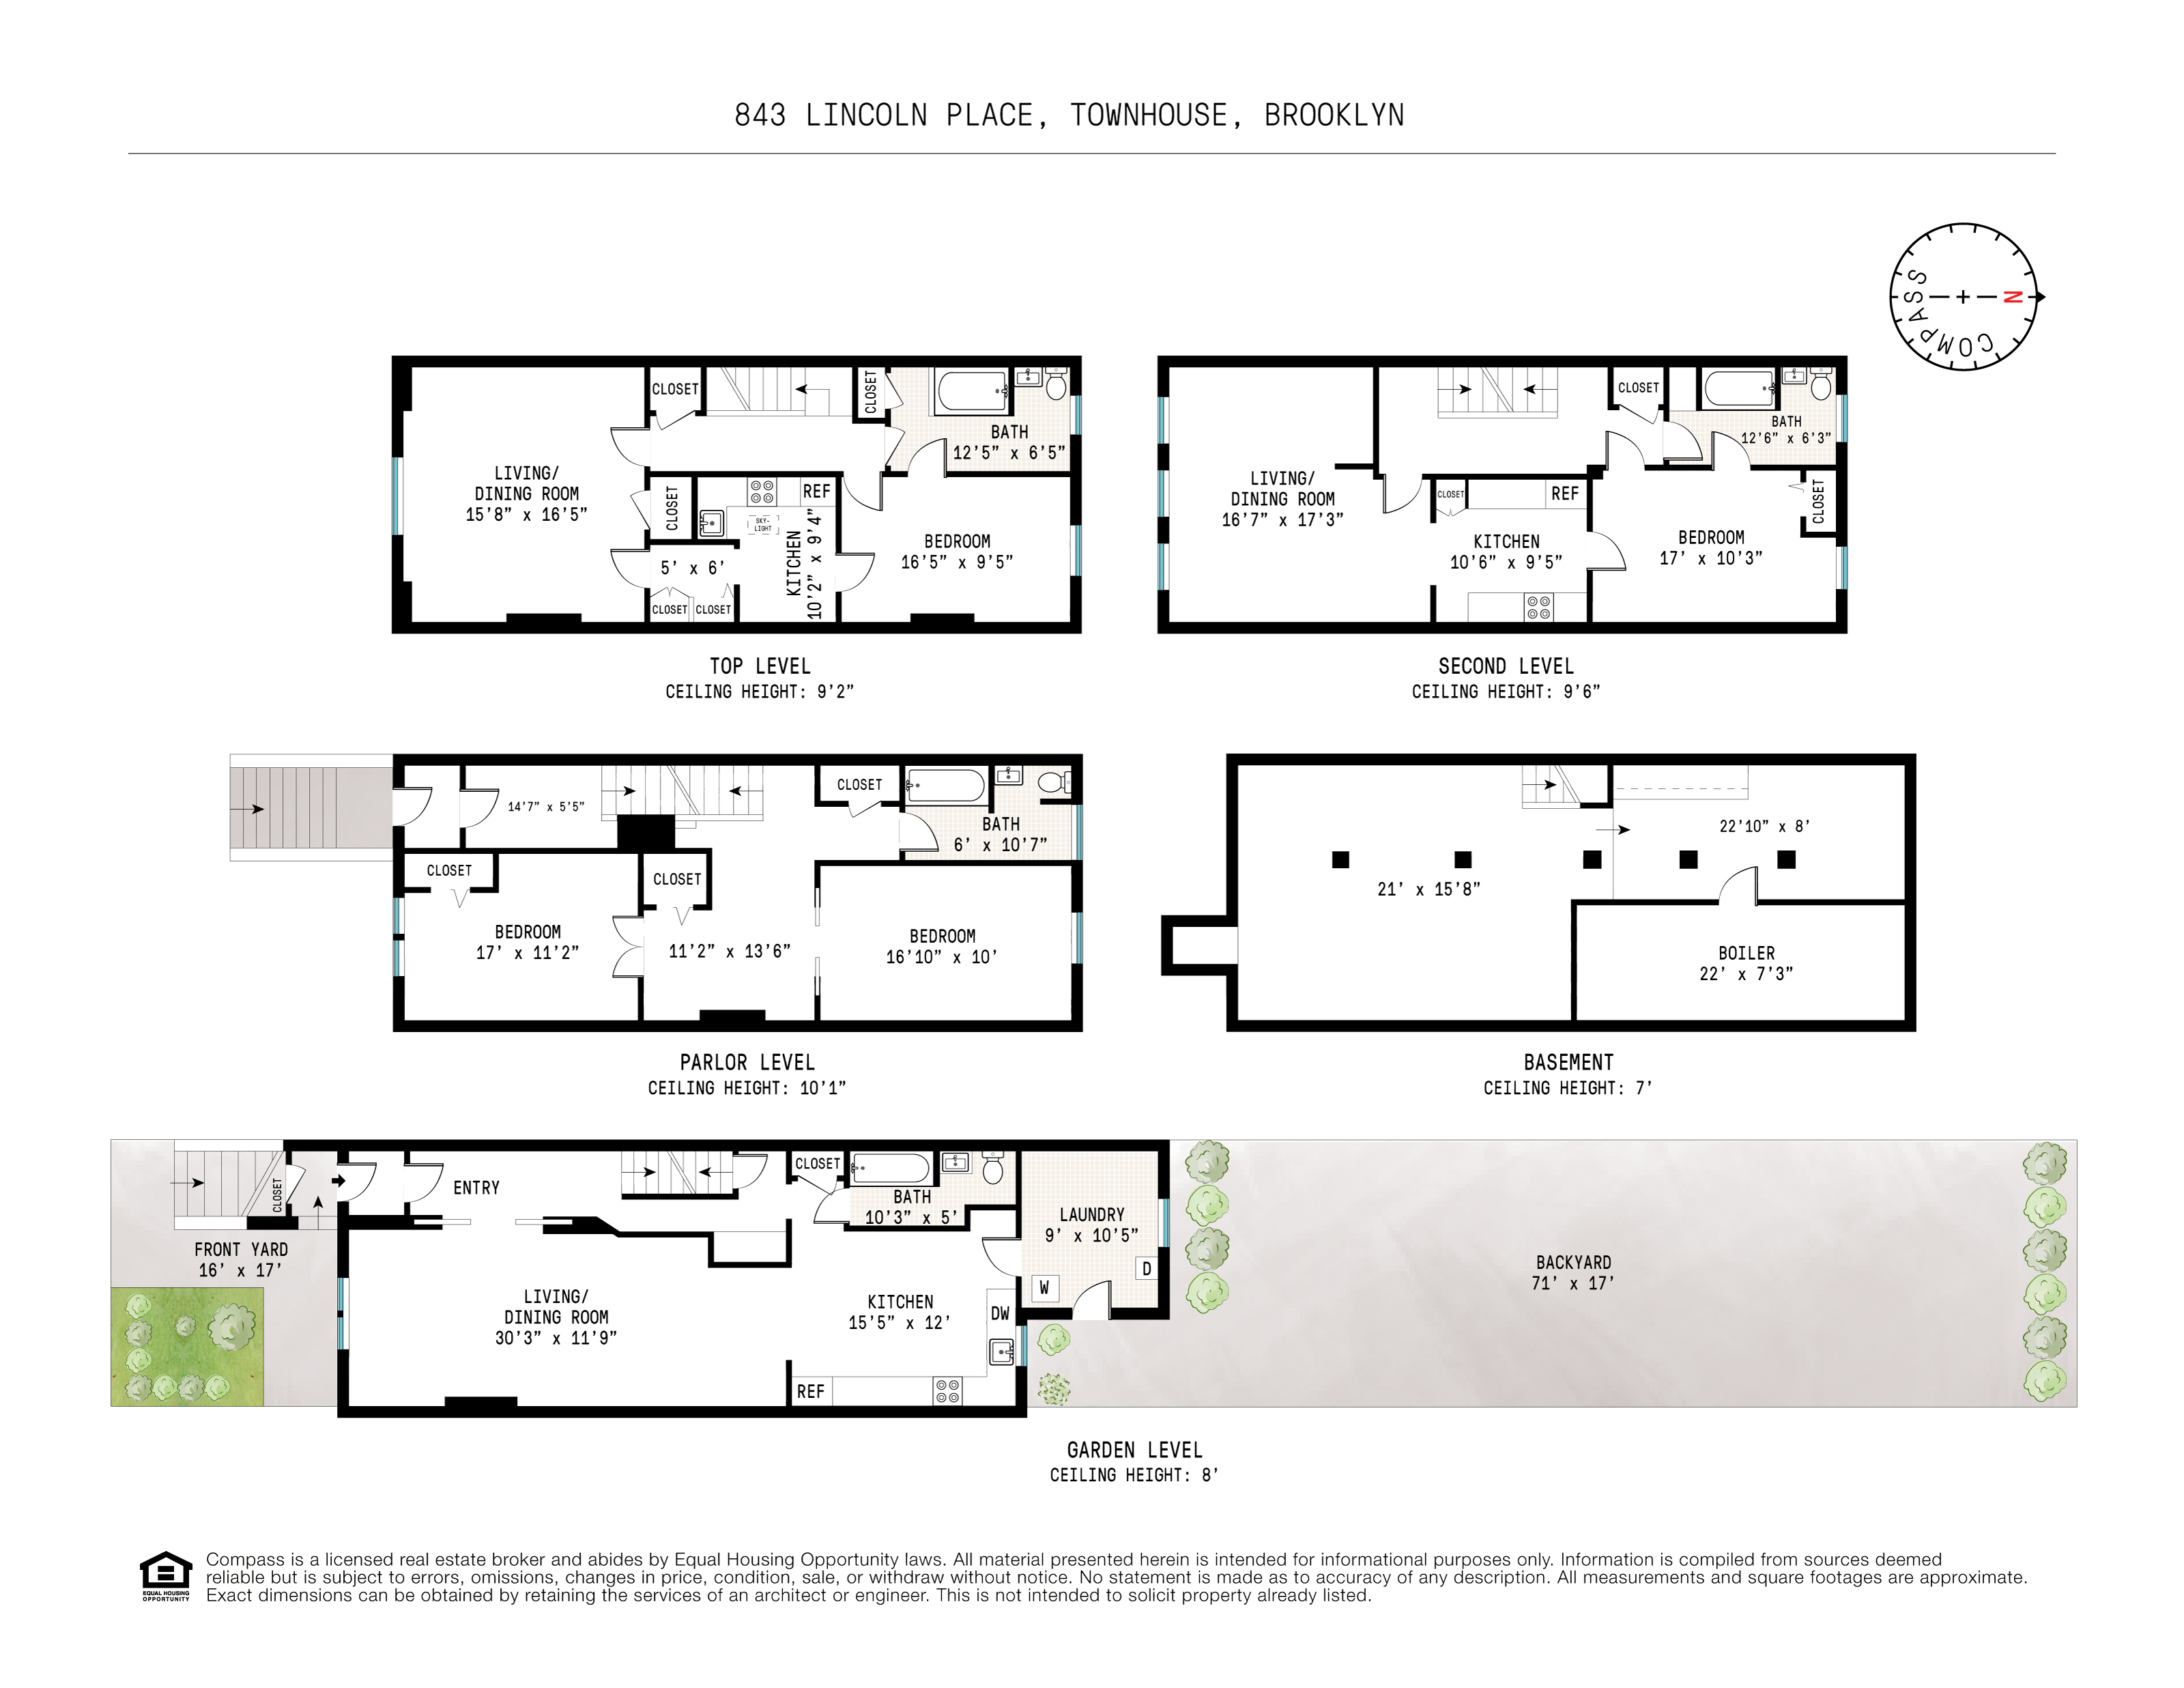 Floorplan for 843 Lincoln Place, 1